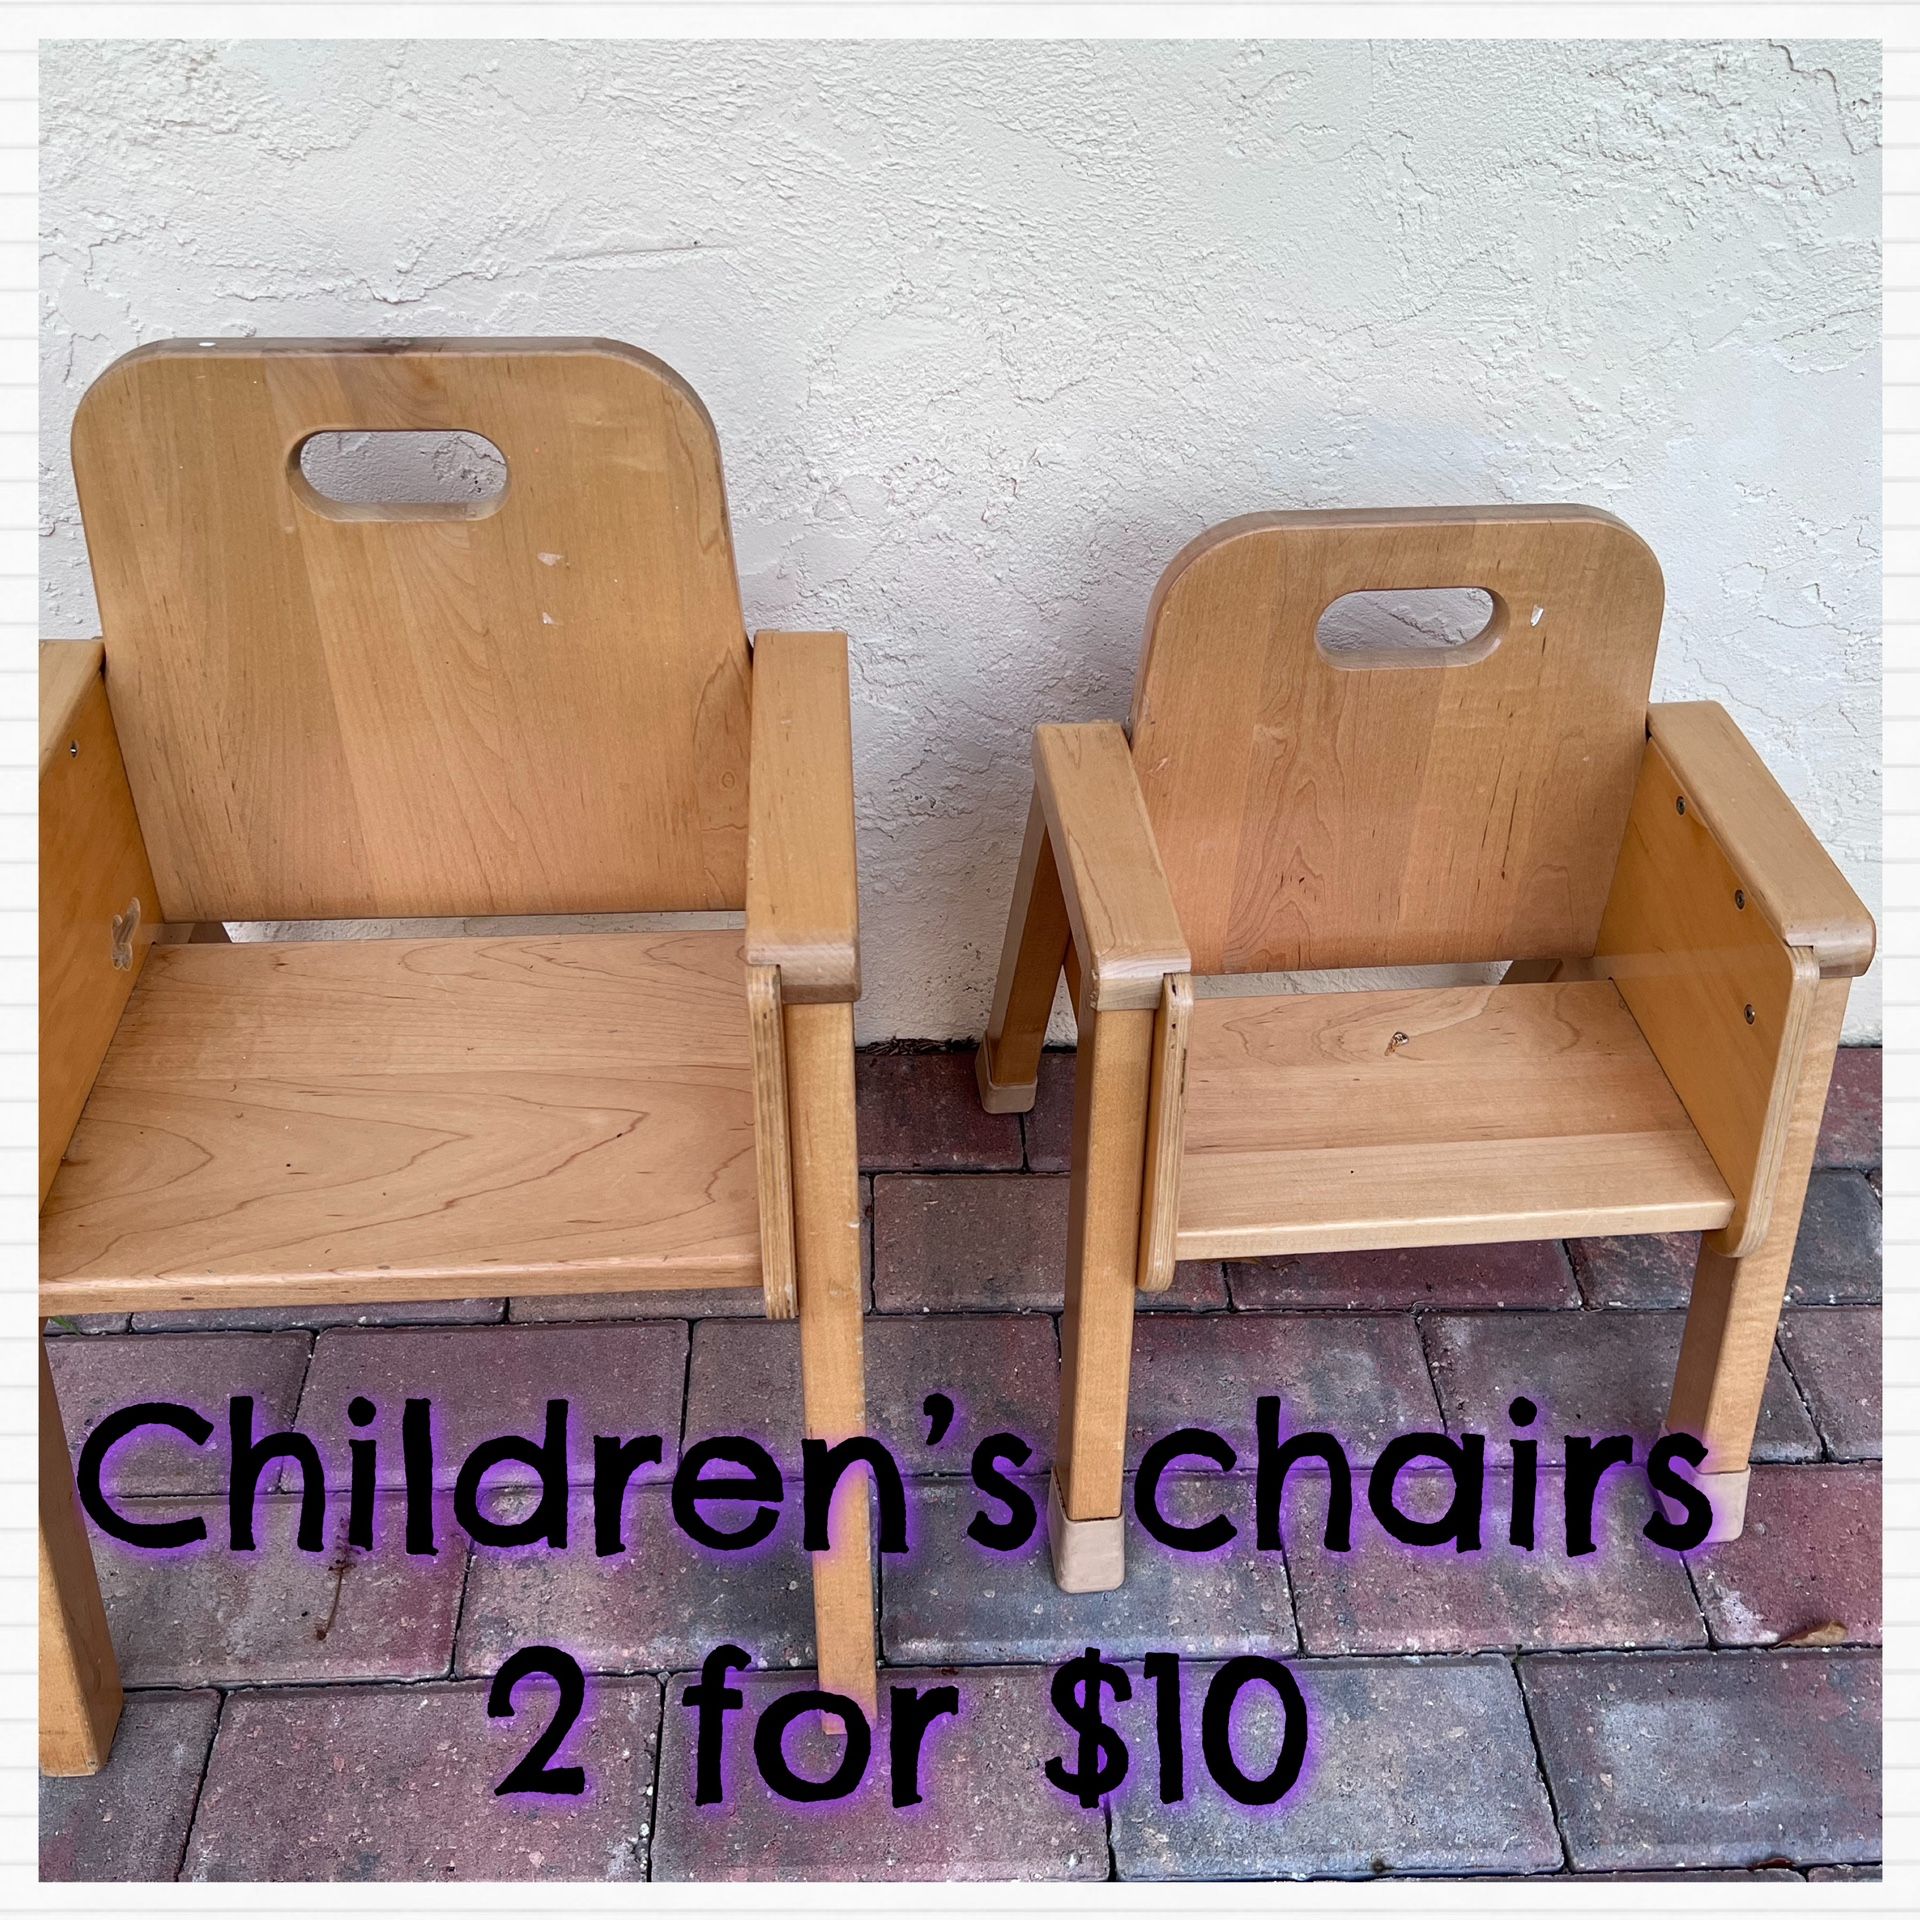 Two children’s chairs